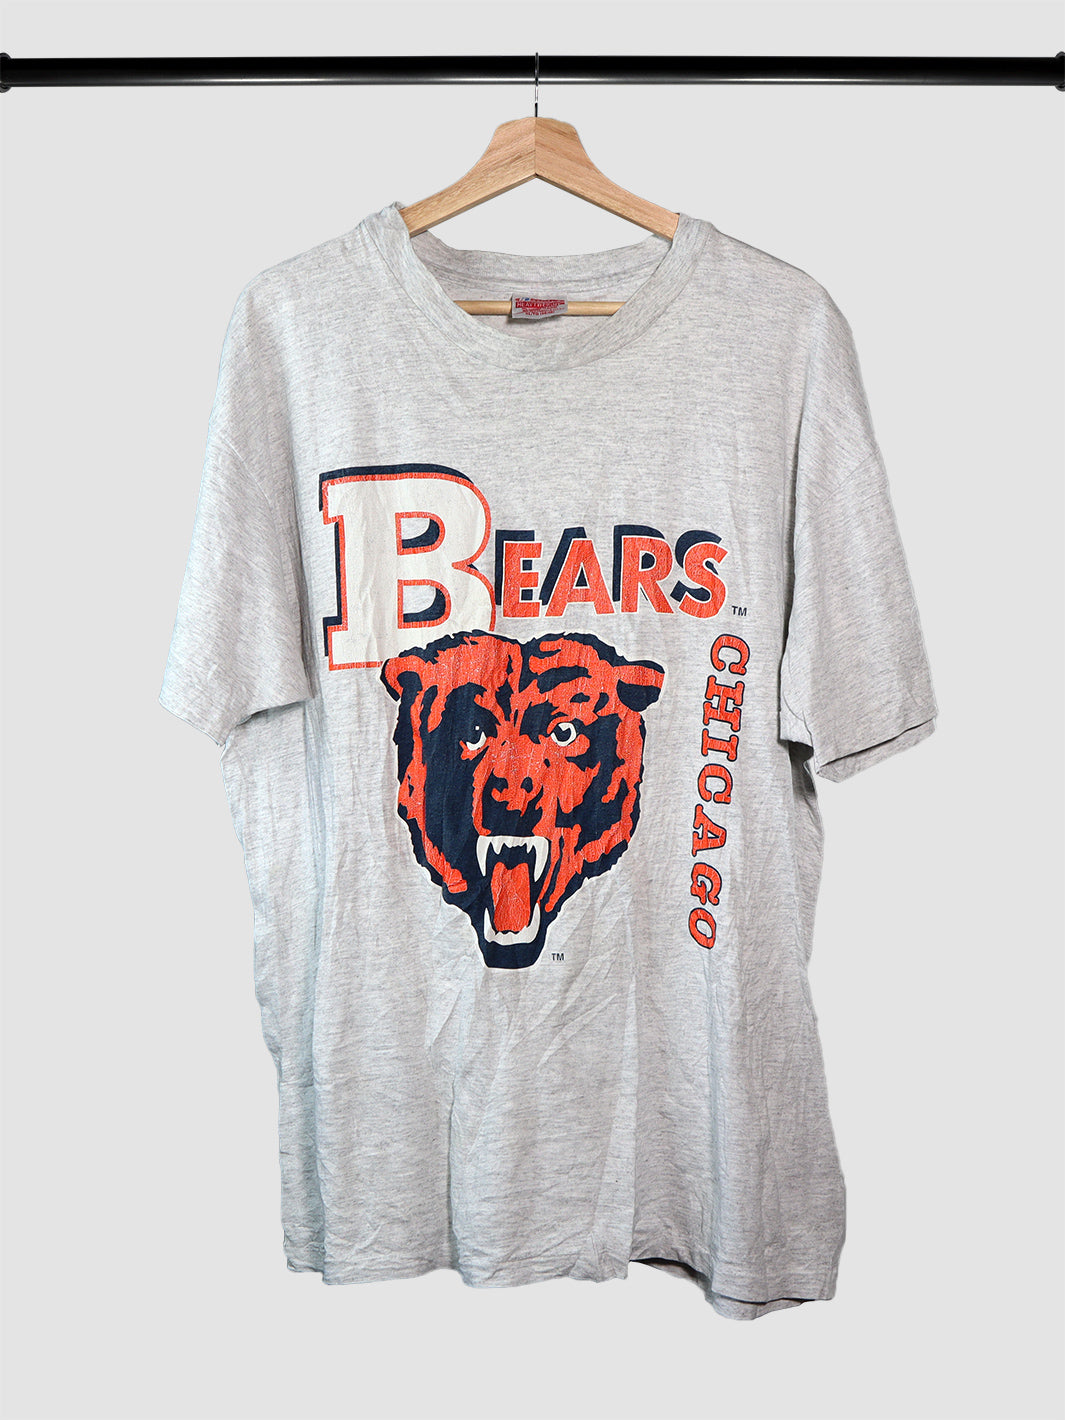 Vintage Chicago Bears football tshirt in gray on a hanger.